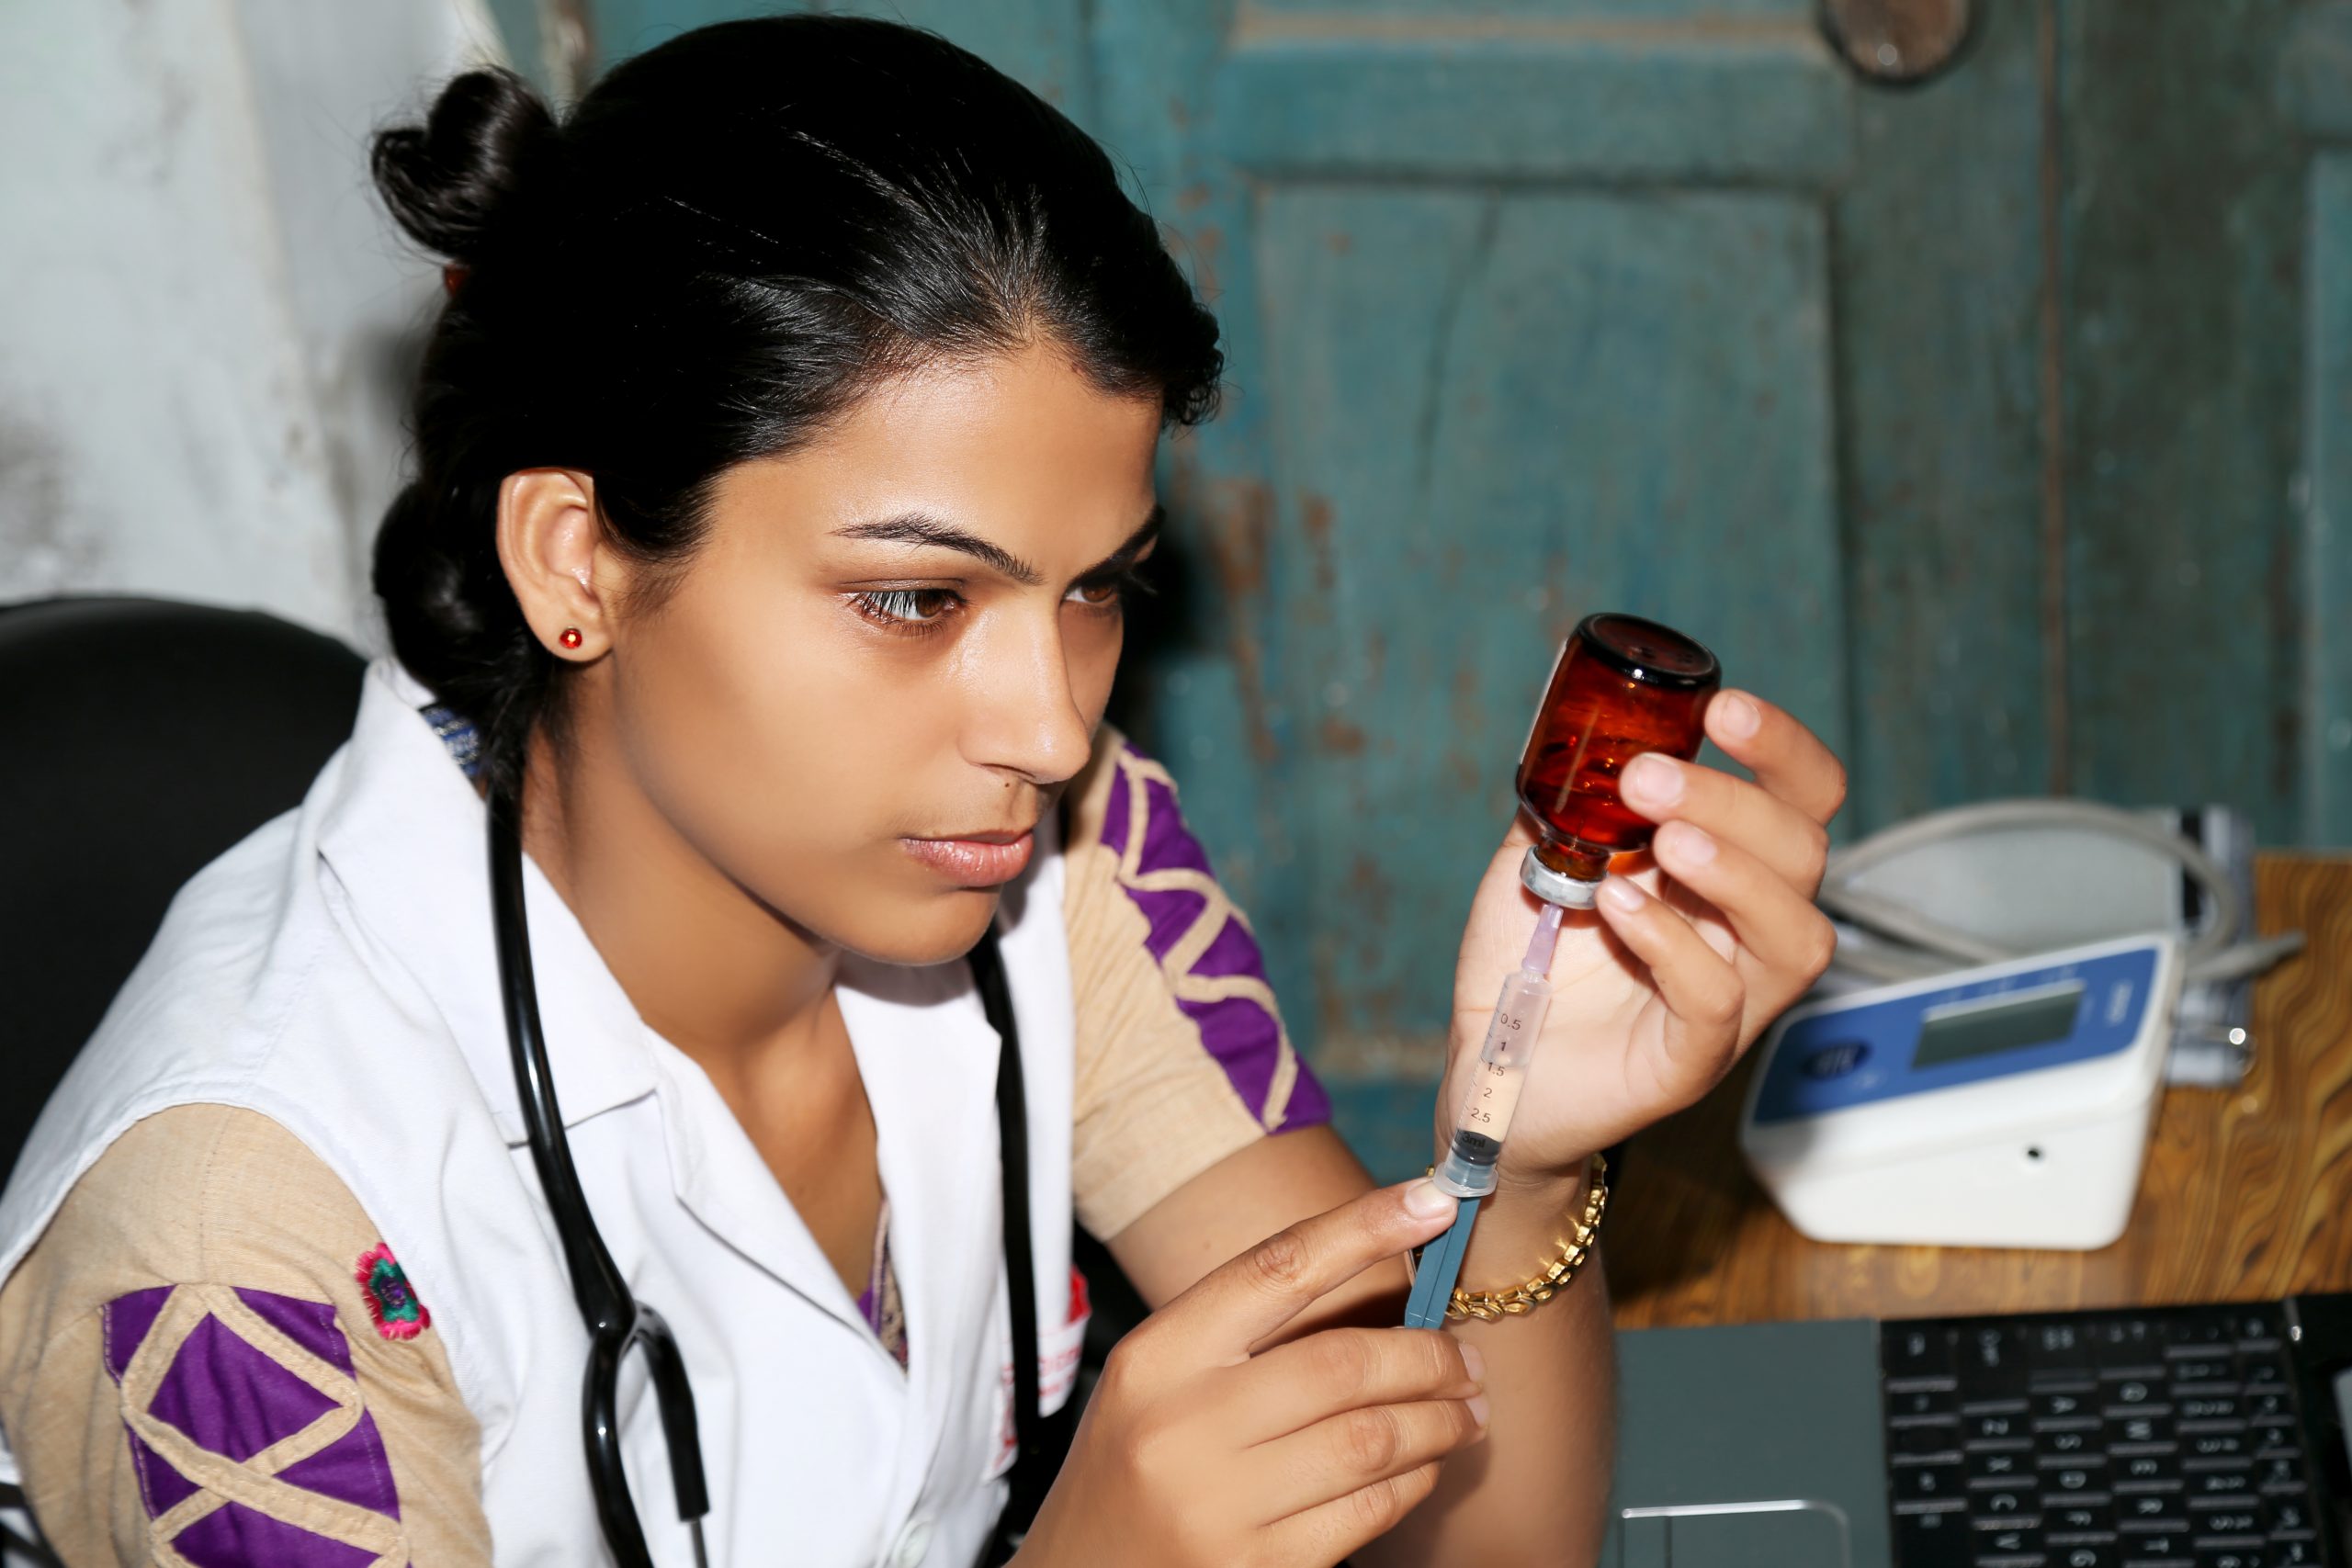 Female doctor preparing injection in clinic